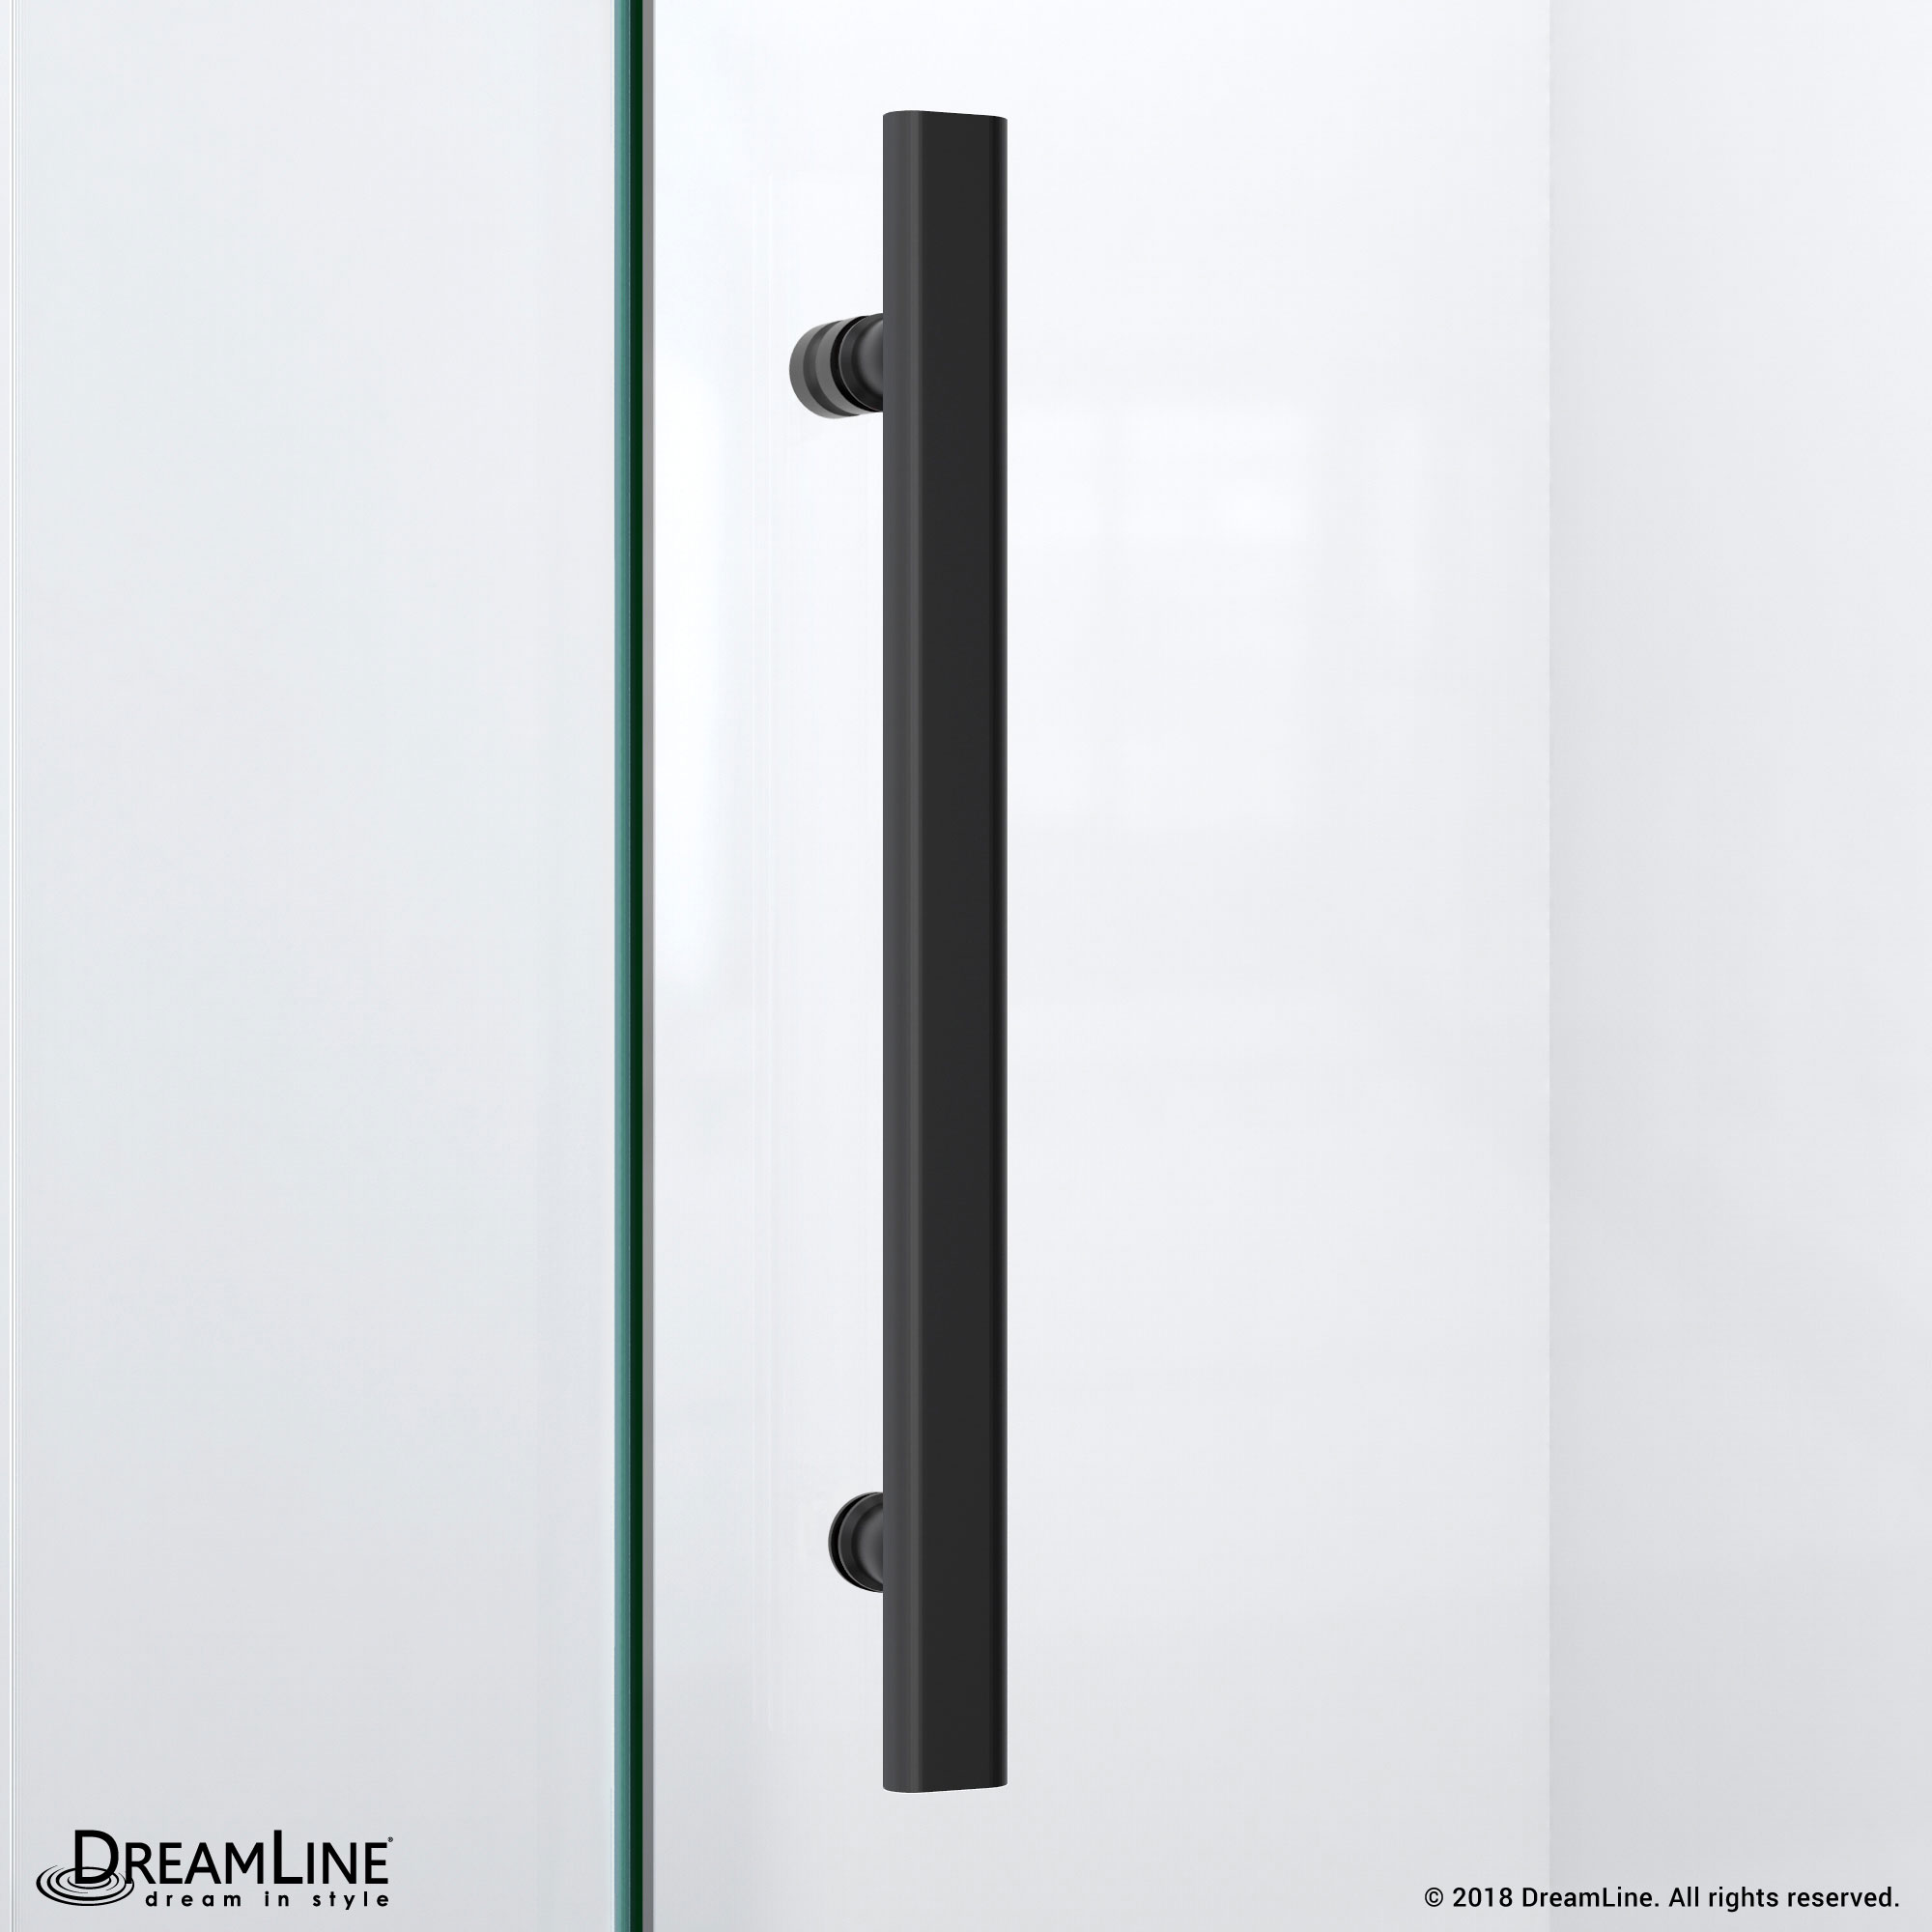 DreamLine Prism Lux 34 5/16 in. D x 34 5/16 in. W x 72 in. H Fully Frameless Hinged Shower Enclosure in Satin Black